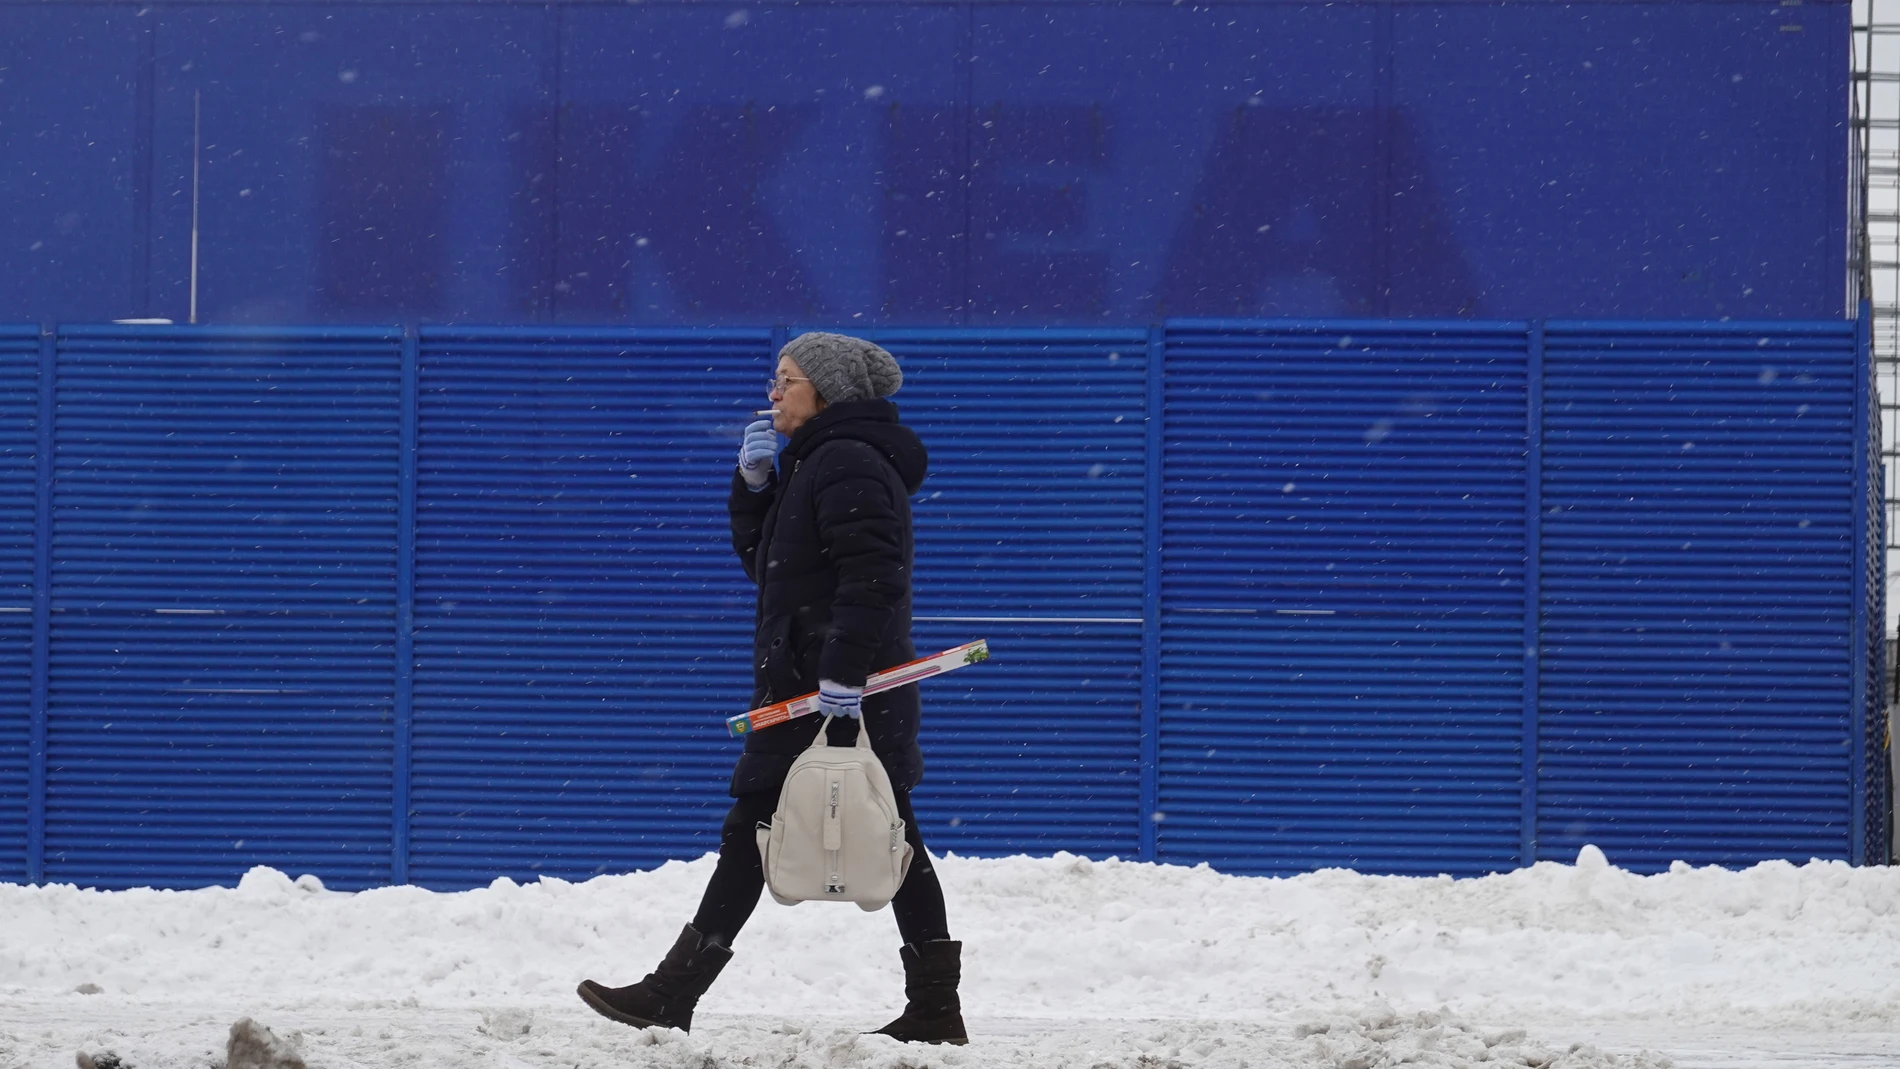 Moscow (Russian Federation), 15/02/2023.- A woman walks in front of a former Ikea store at the Mega mall in Moscow district Tyoply Stanin, Russia, 15 February 2023. The Swedish multinational company Ikea left the Russian market in 2022. As part of the economic sanctions imposed by the West on Russia, a number of international brands had announced the suspension, limitation or closing of their operations in Russia. On 24 February 2022 Russian troops entered the Ukrainian territory in what the Russian president declared a 'Special Military Operation', starting an armed conflict. (Rusia, Ucrania, Moscú) EFE/EPA/MAXIM SHIPENKOV